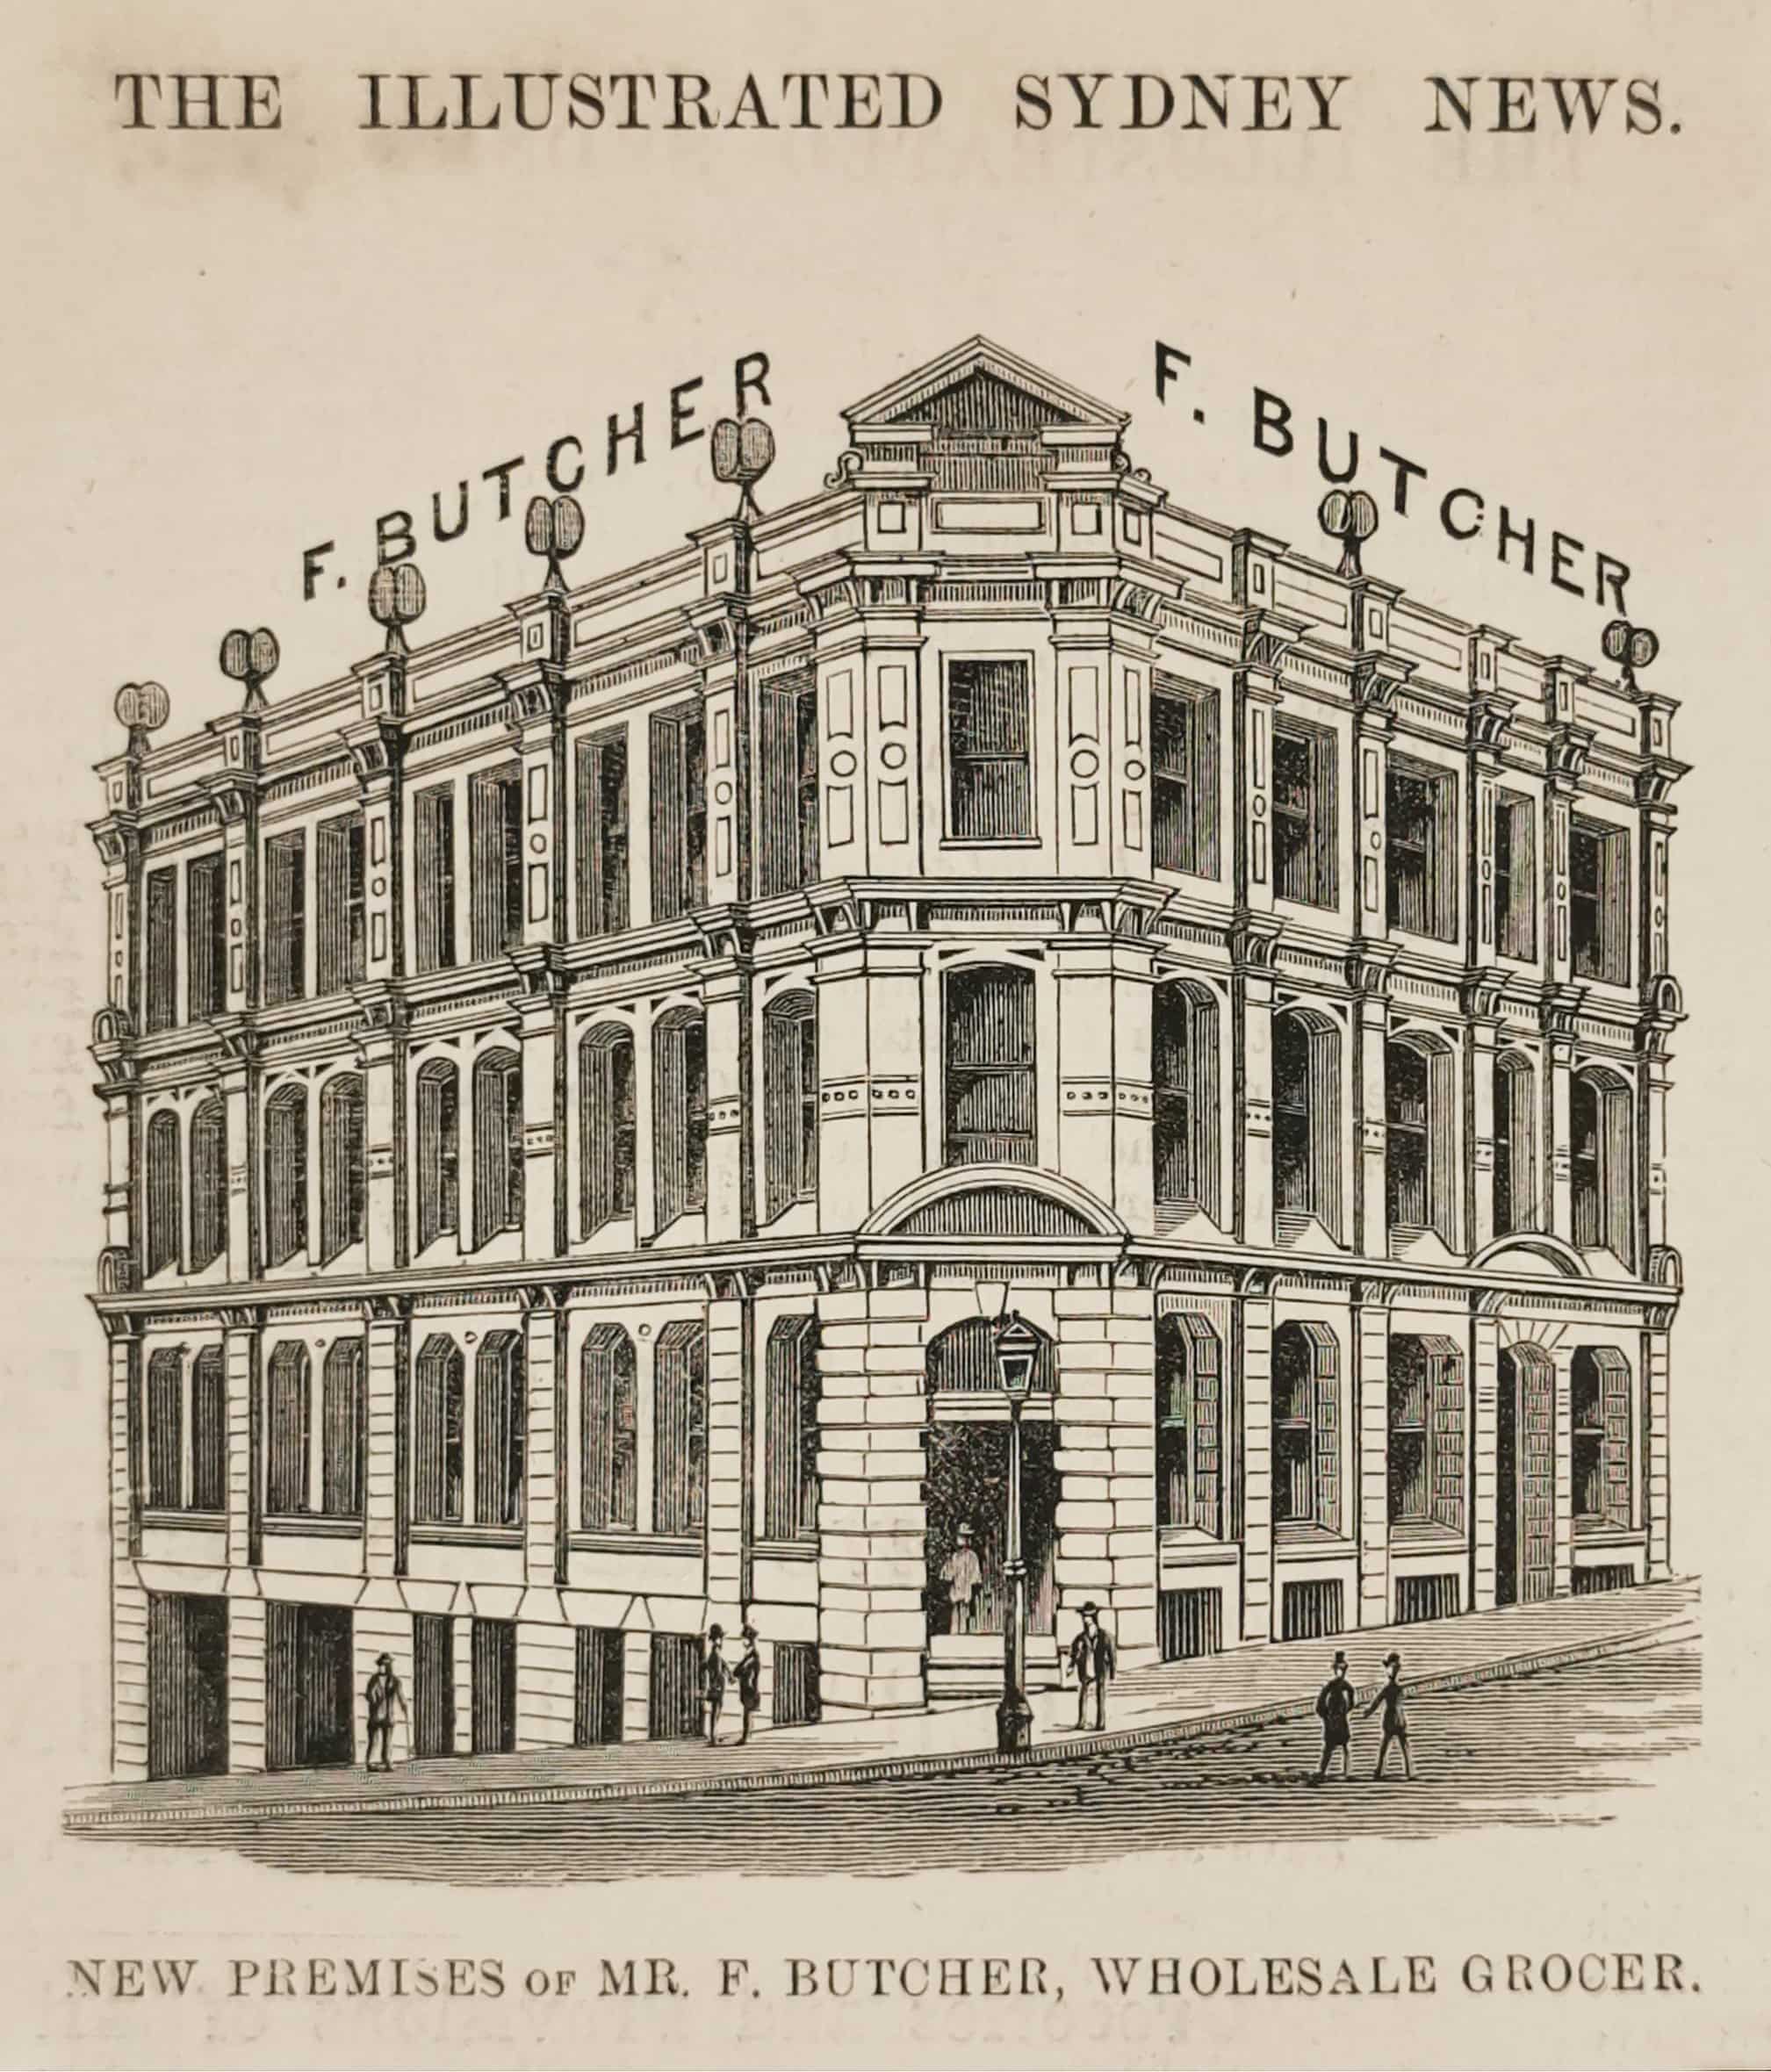 New Premises of Mr. F. Butcher, Wholesale Grocer. - Antique View from 1884